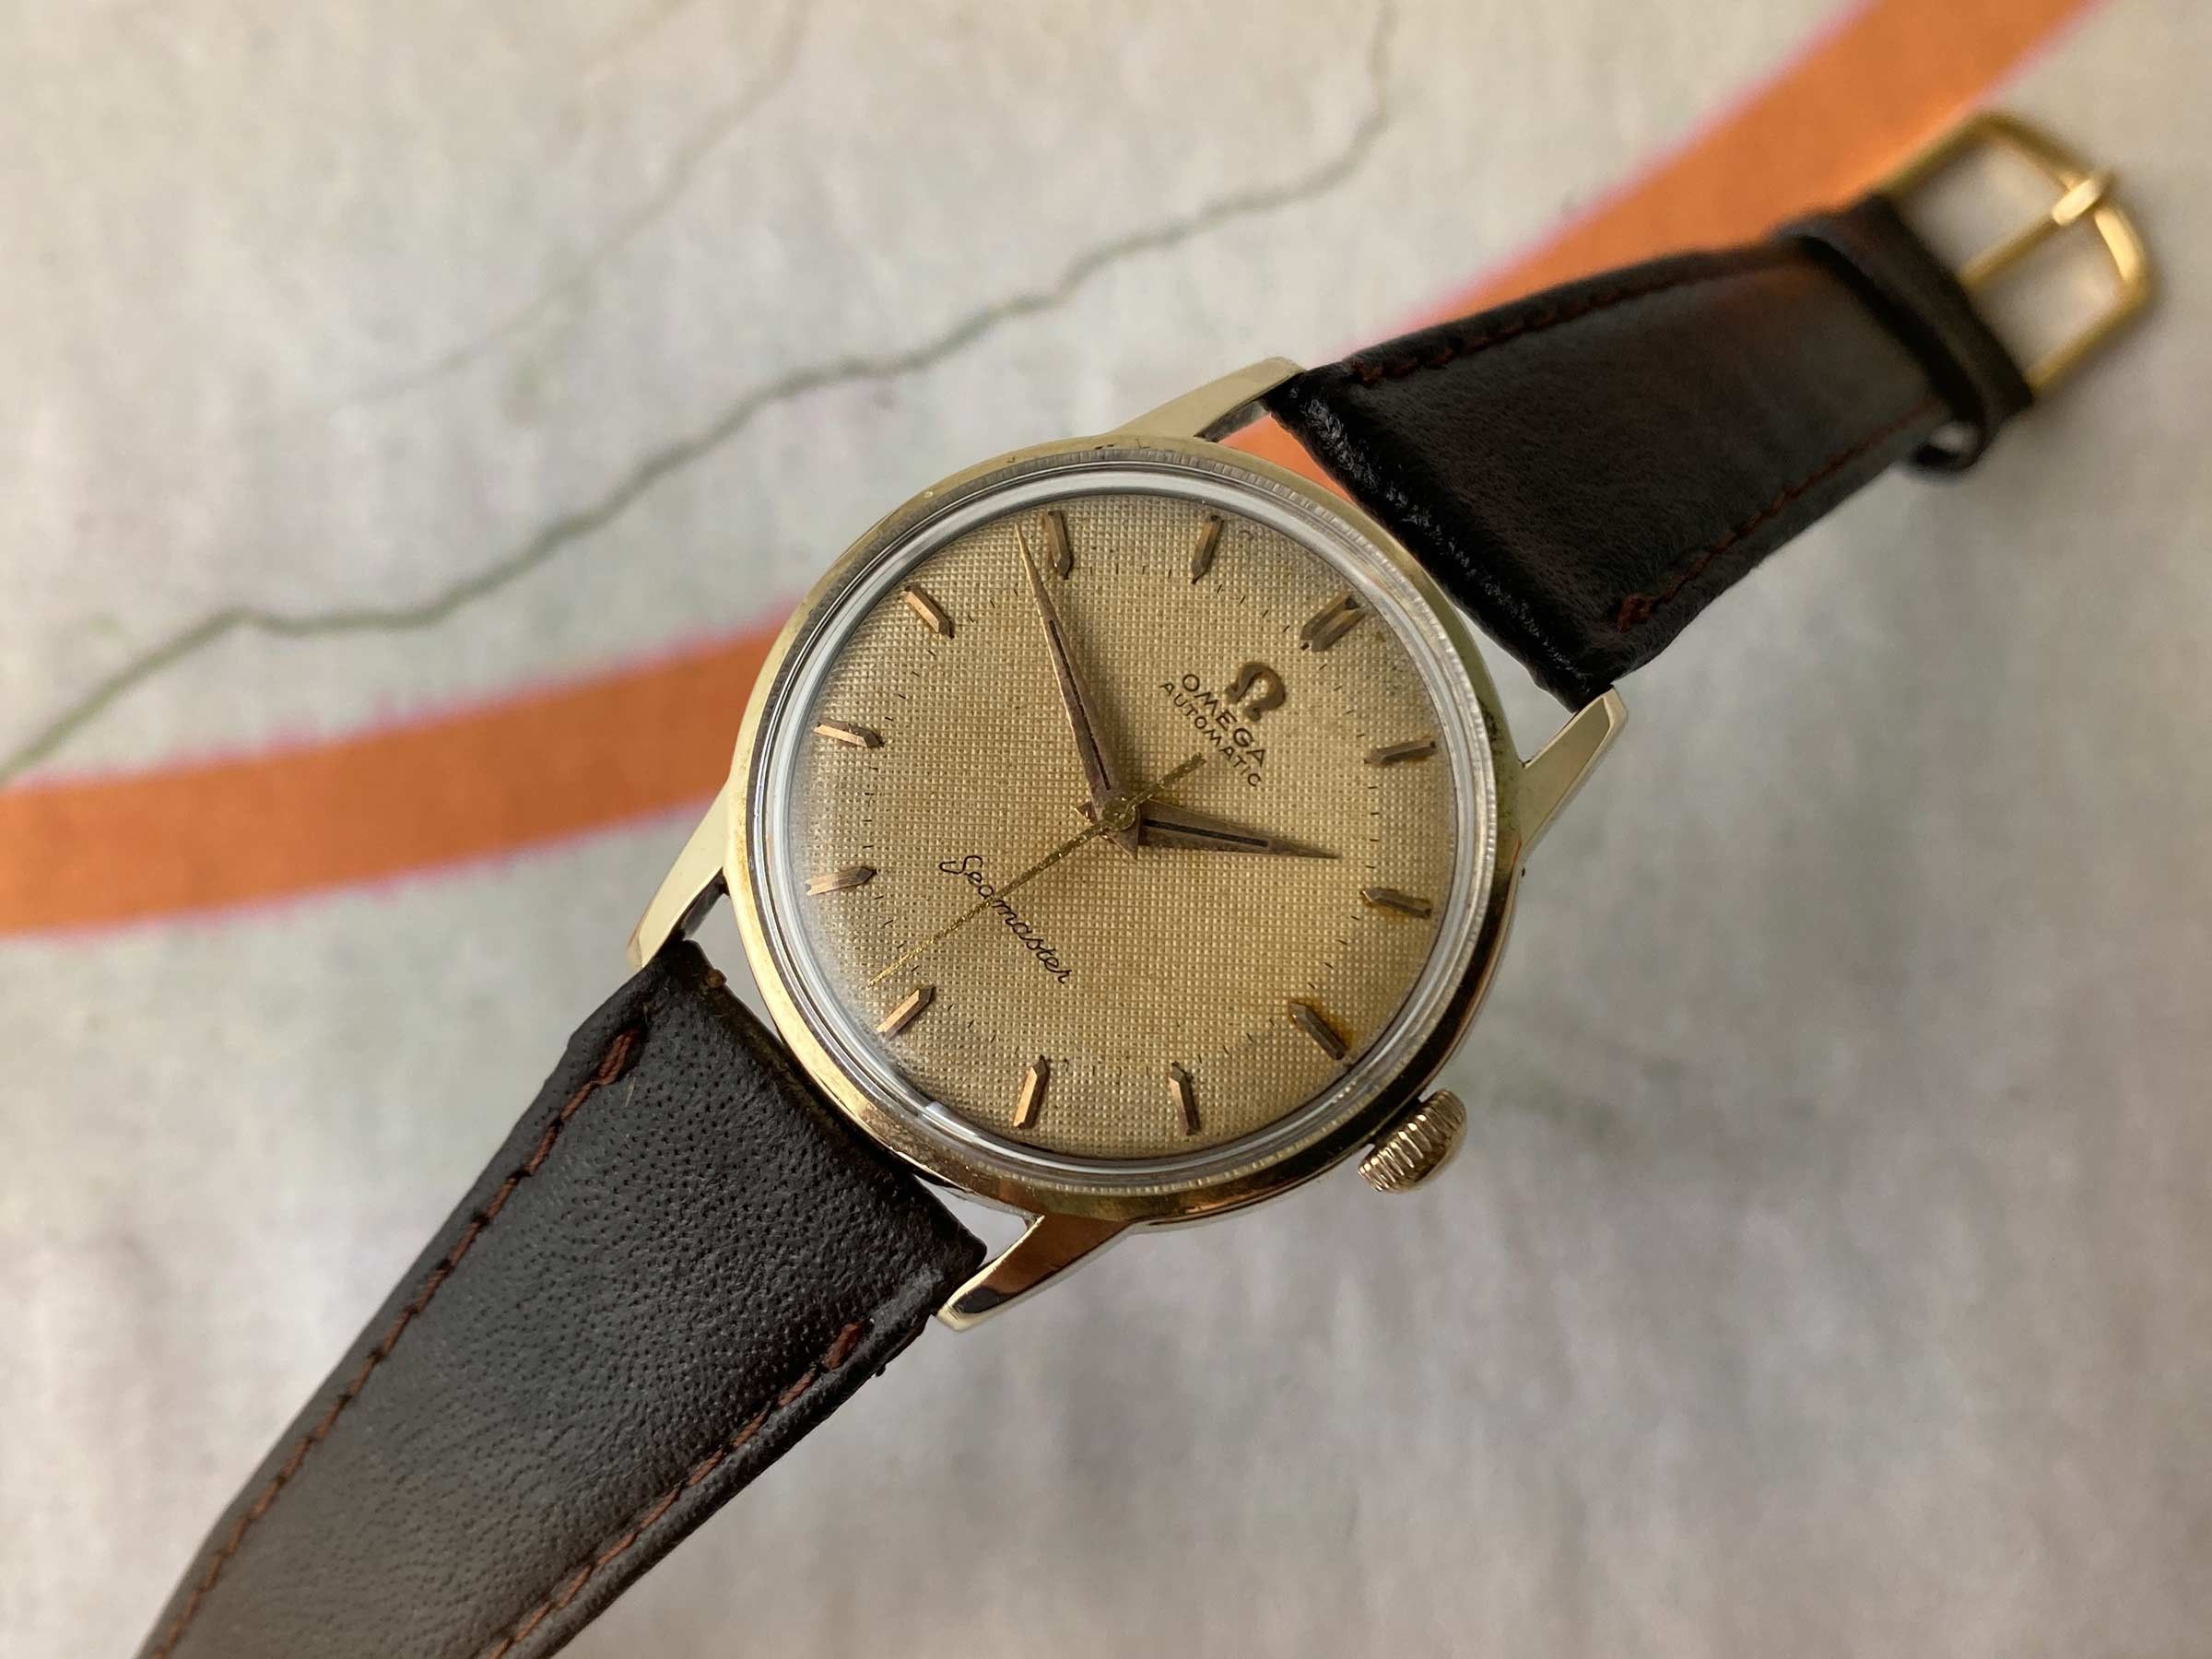 Omega Watches — Cool Vintage Watches